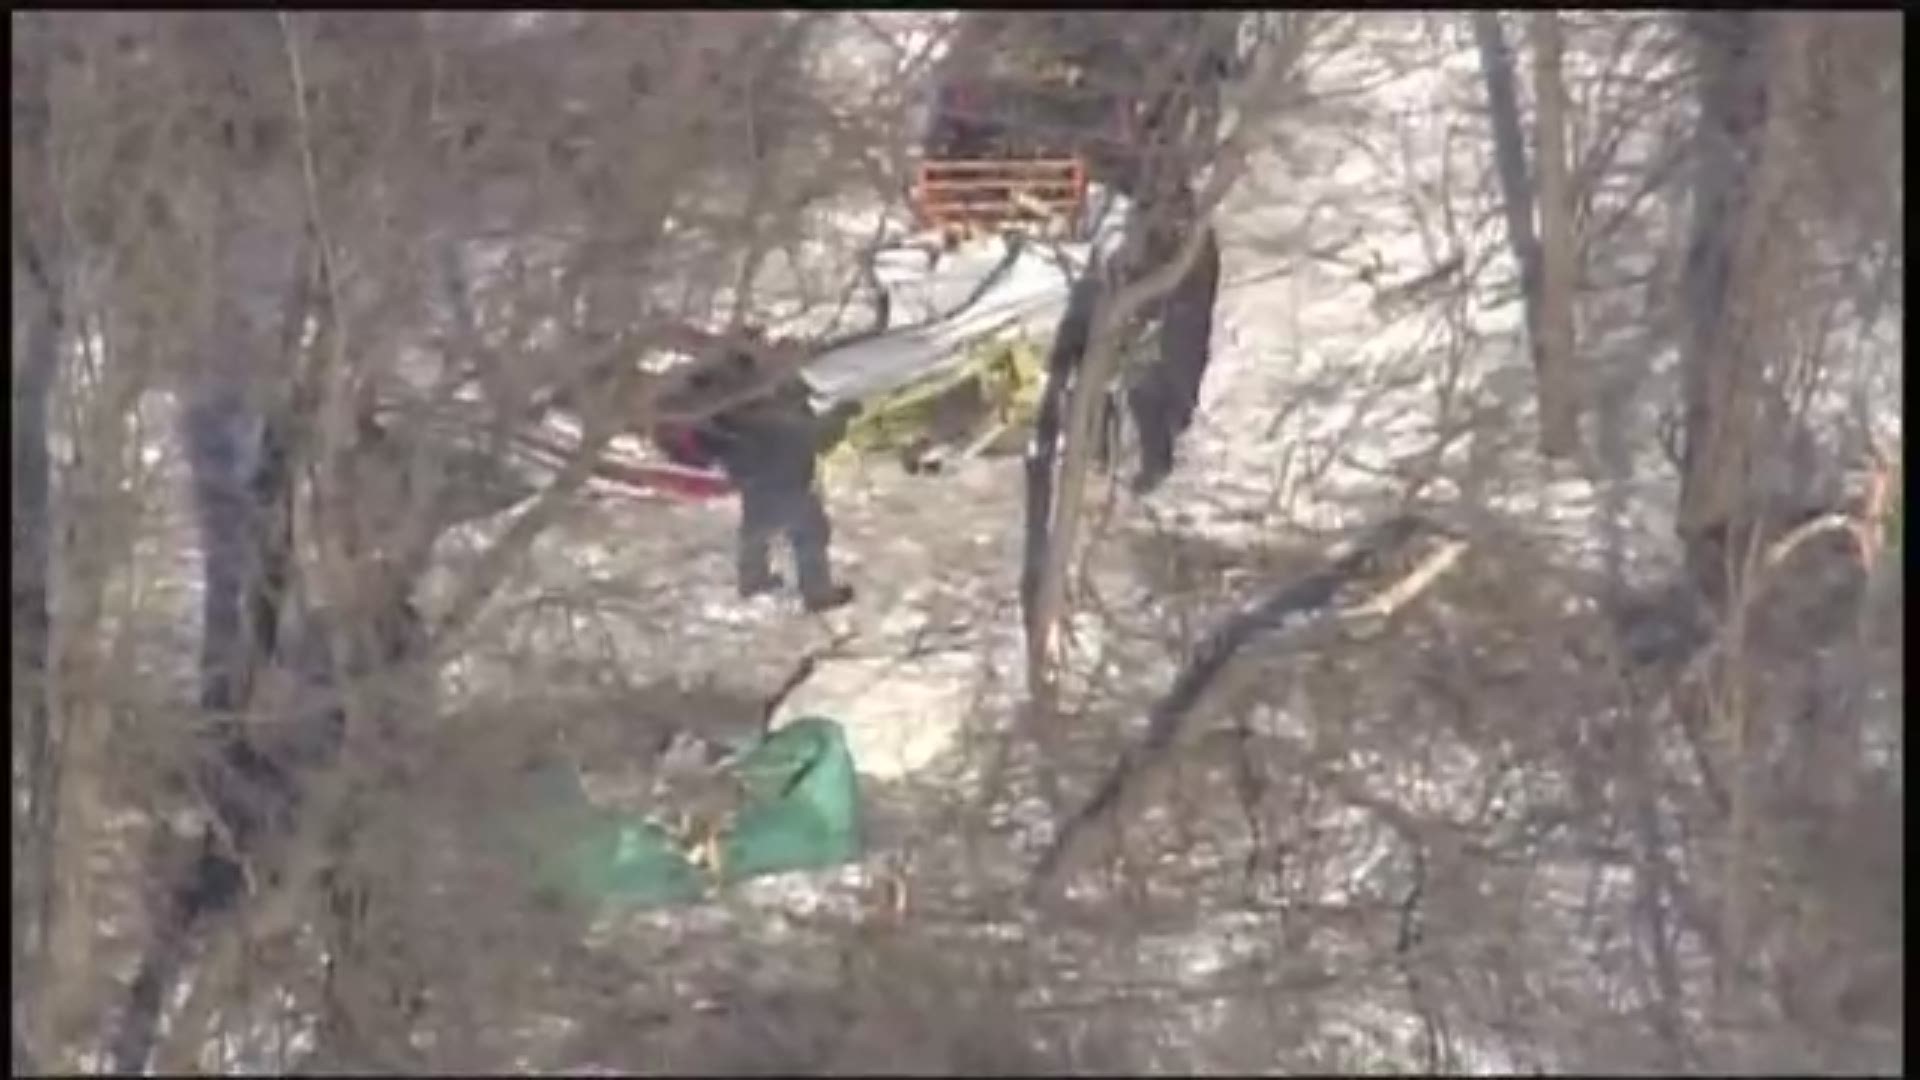 On Sunday, crews cleaned up the plane crash near the Crow River in Hennepin County. Sky 11 shot aerials of their work.